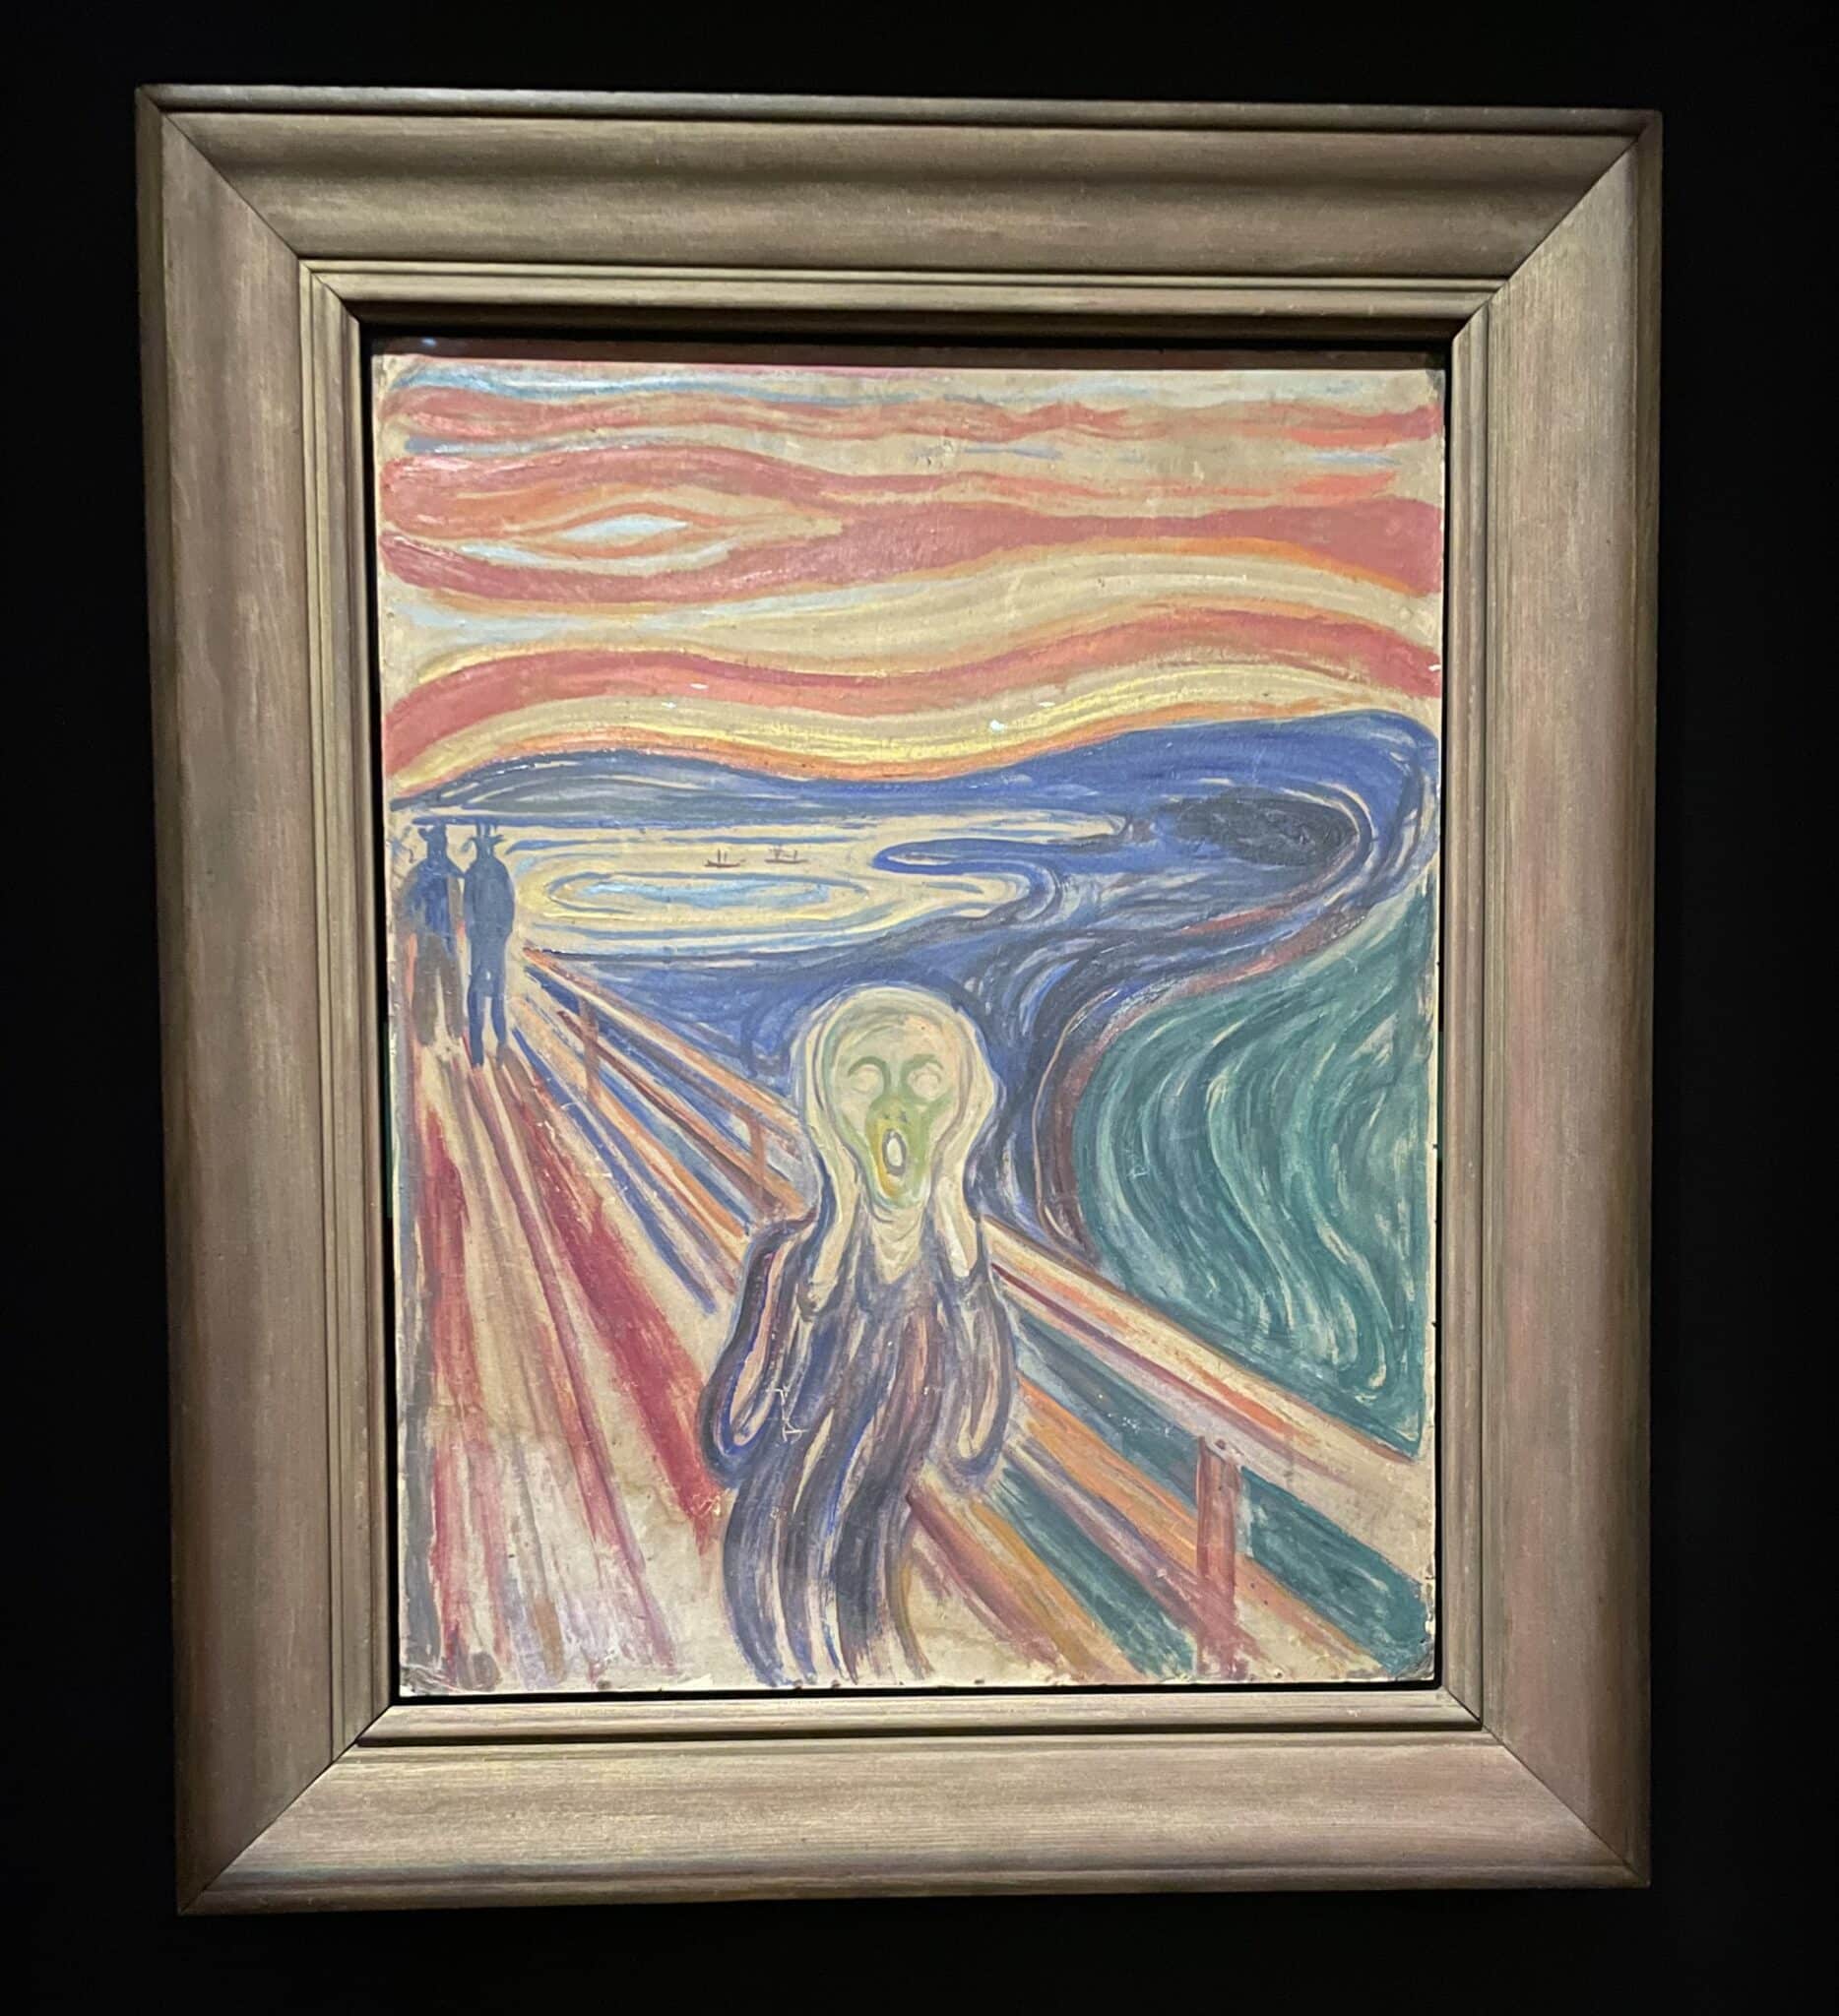 The Scream painting from the Munch Museum